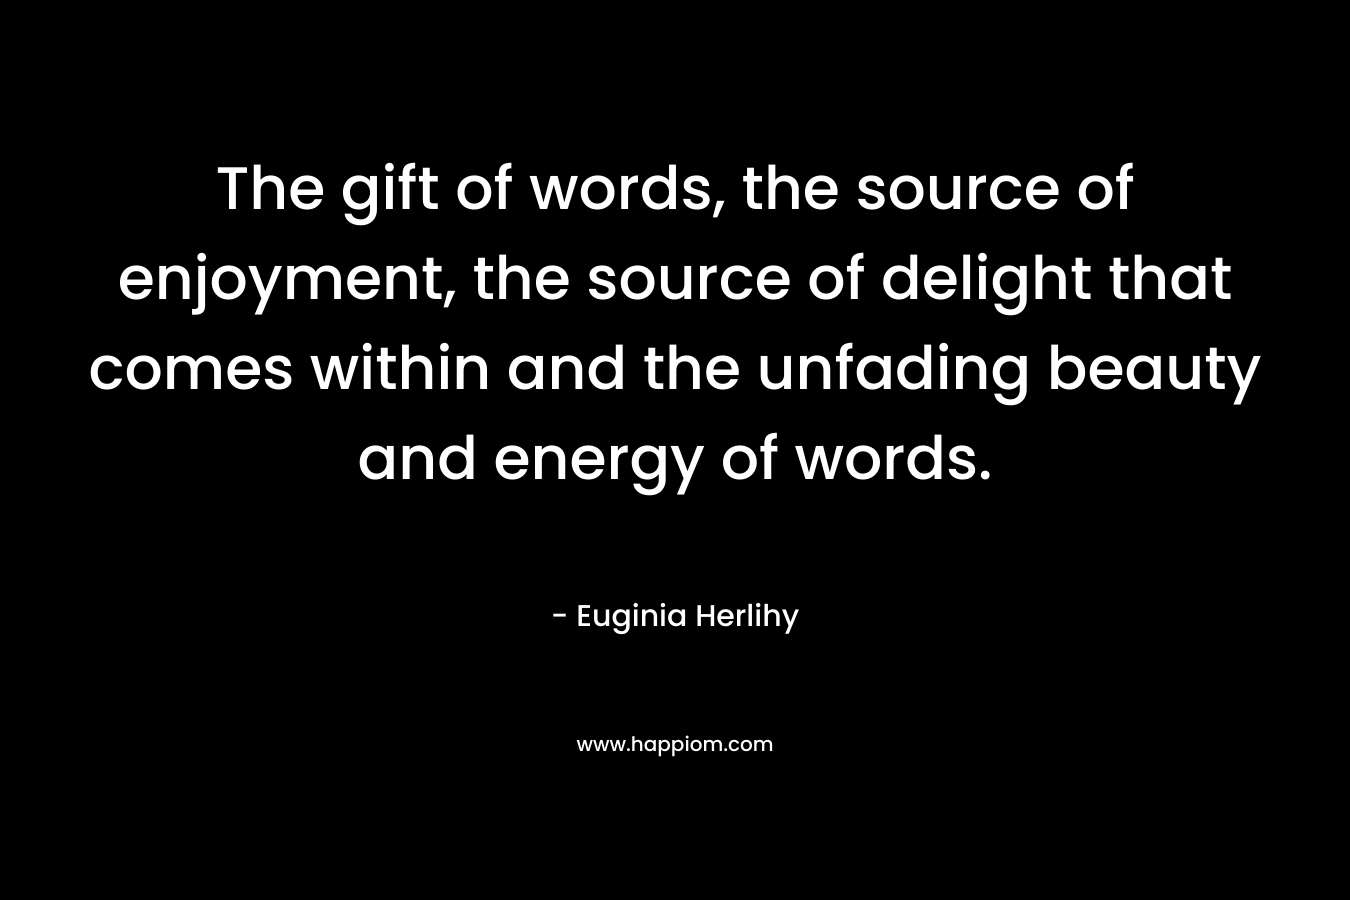 The gift of words, the source of enjoyment, the source of delight that comes within and the unfading beauty and energy of words.